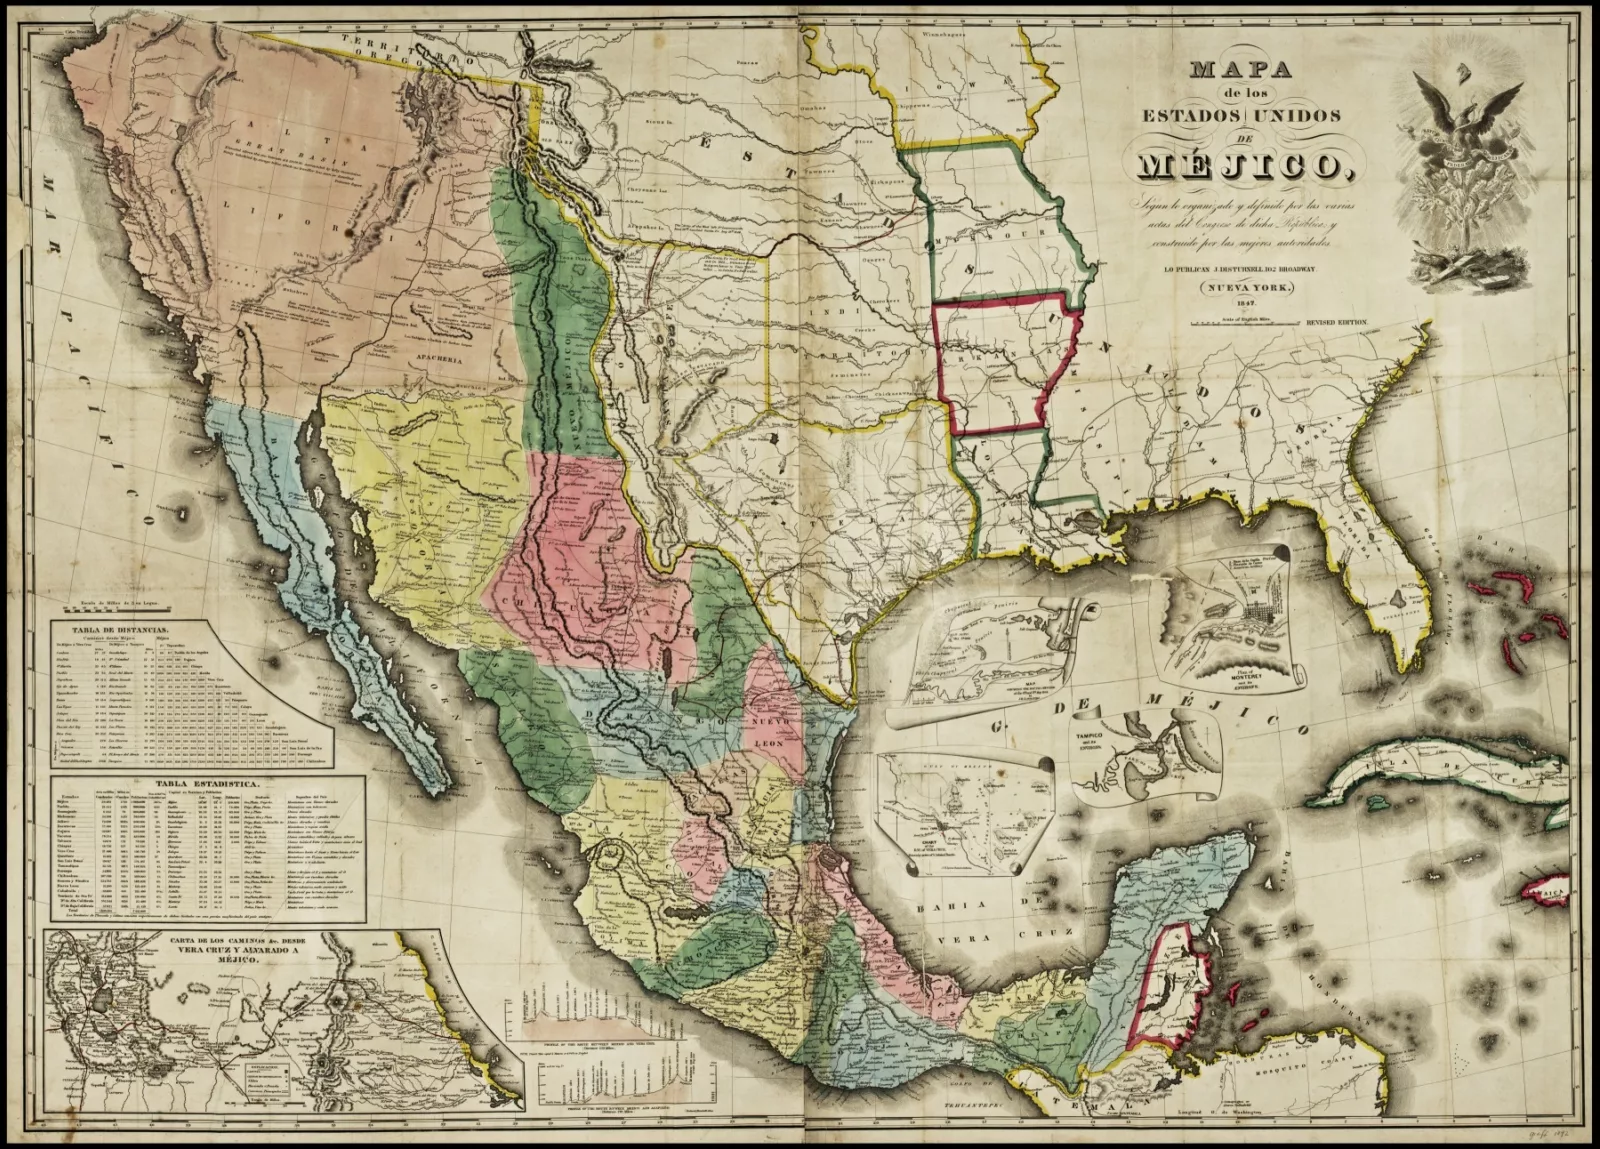 A map shows the United States as far west as Texas. Beyond are the states of Mexico.